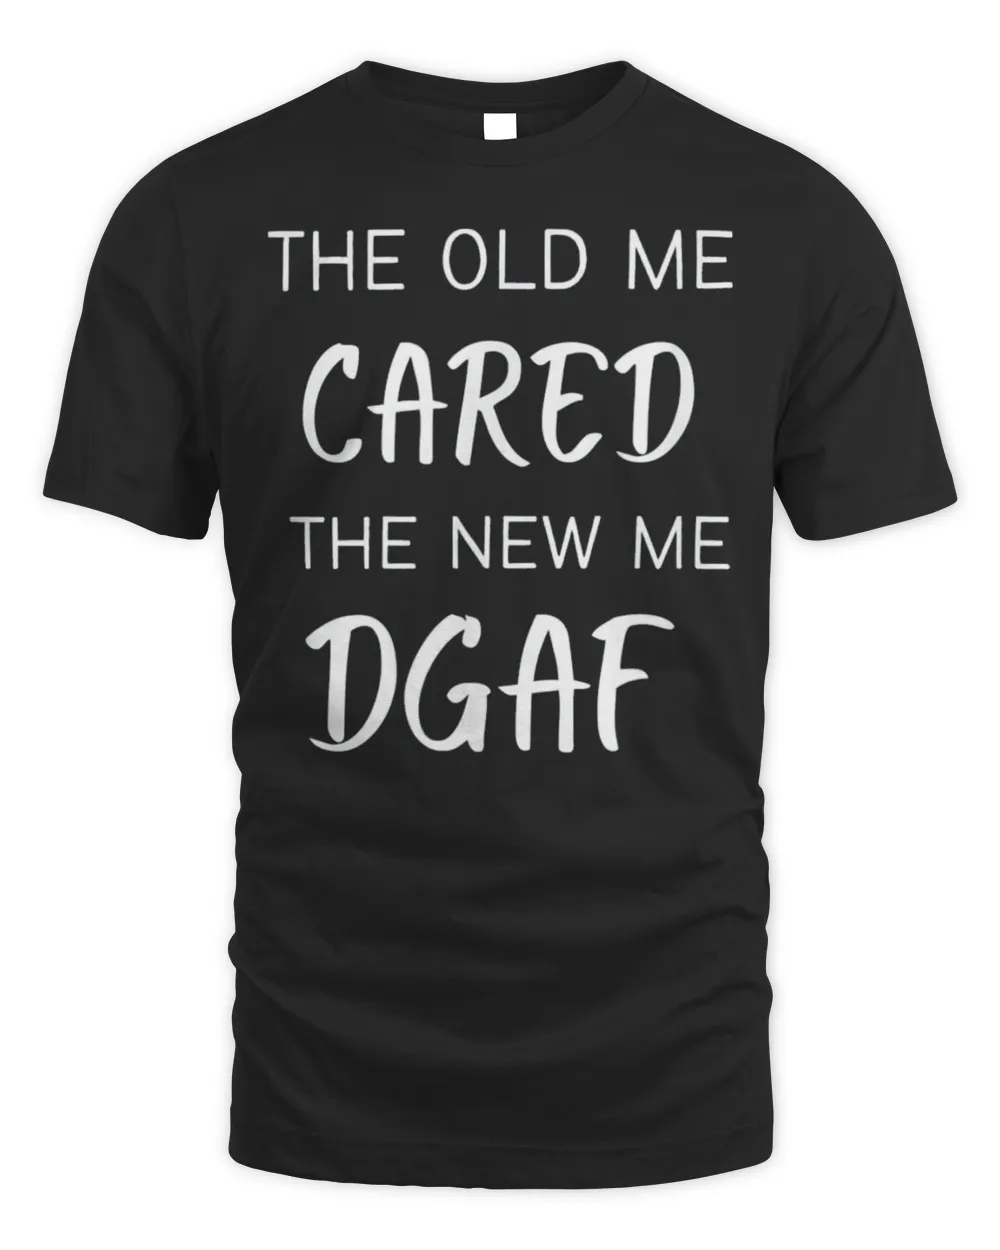 THE OLD ME CARED , THE NEW ME DGAF Shirt